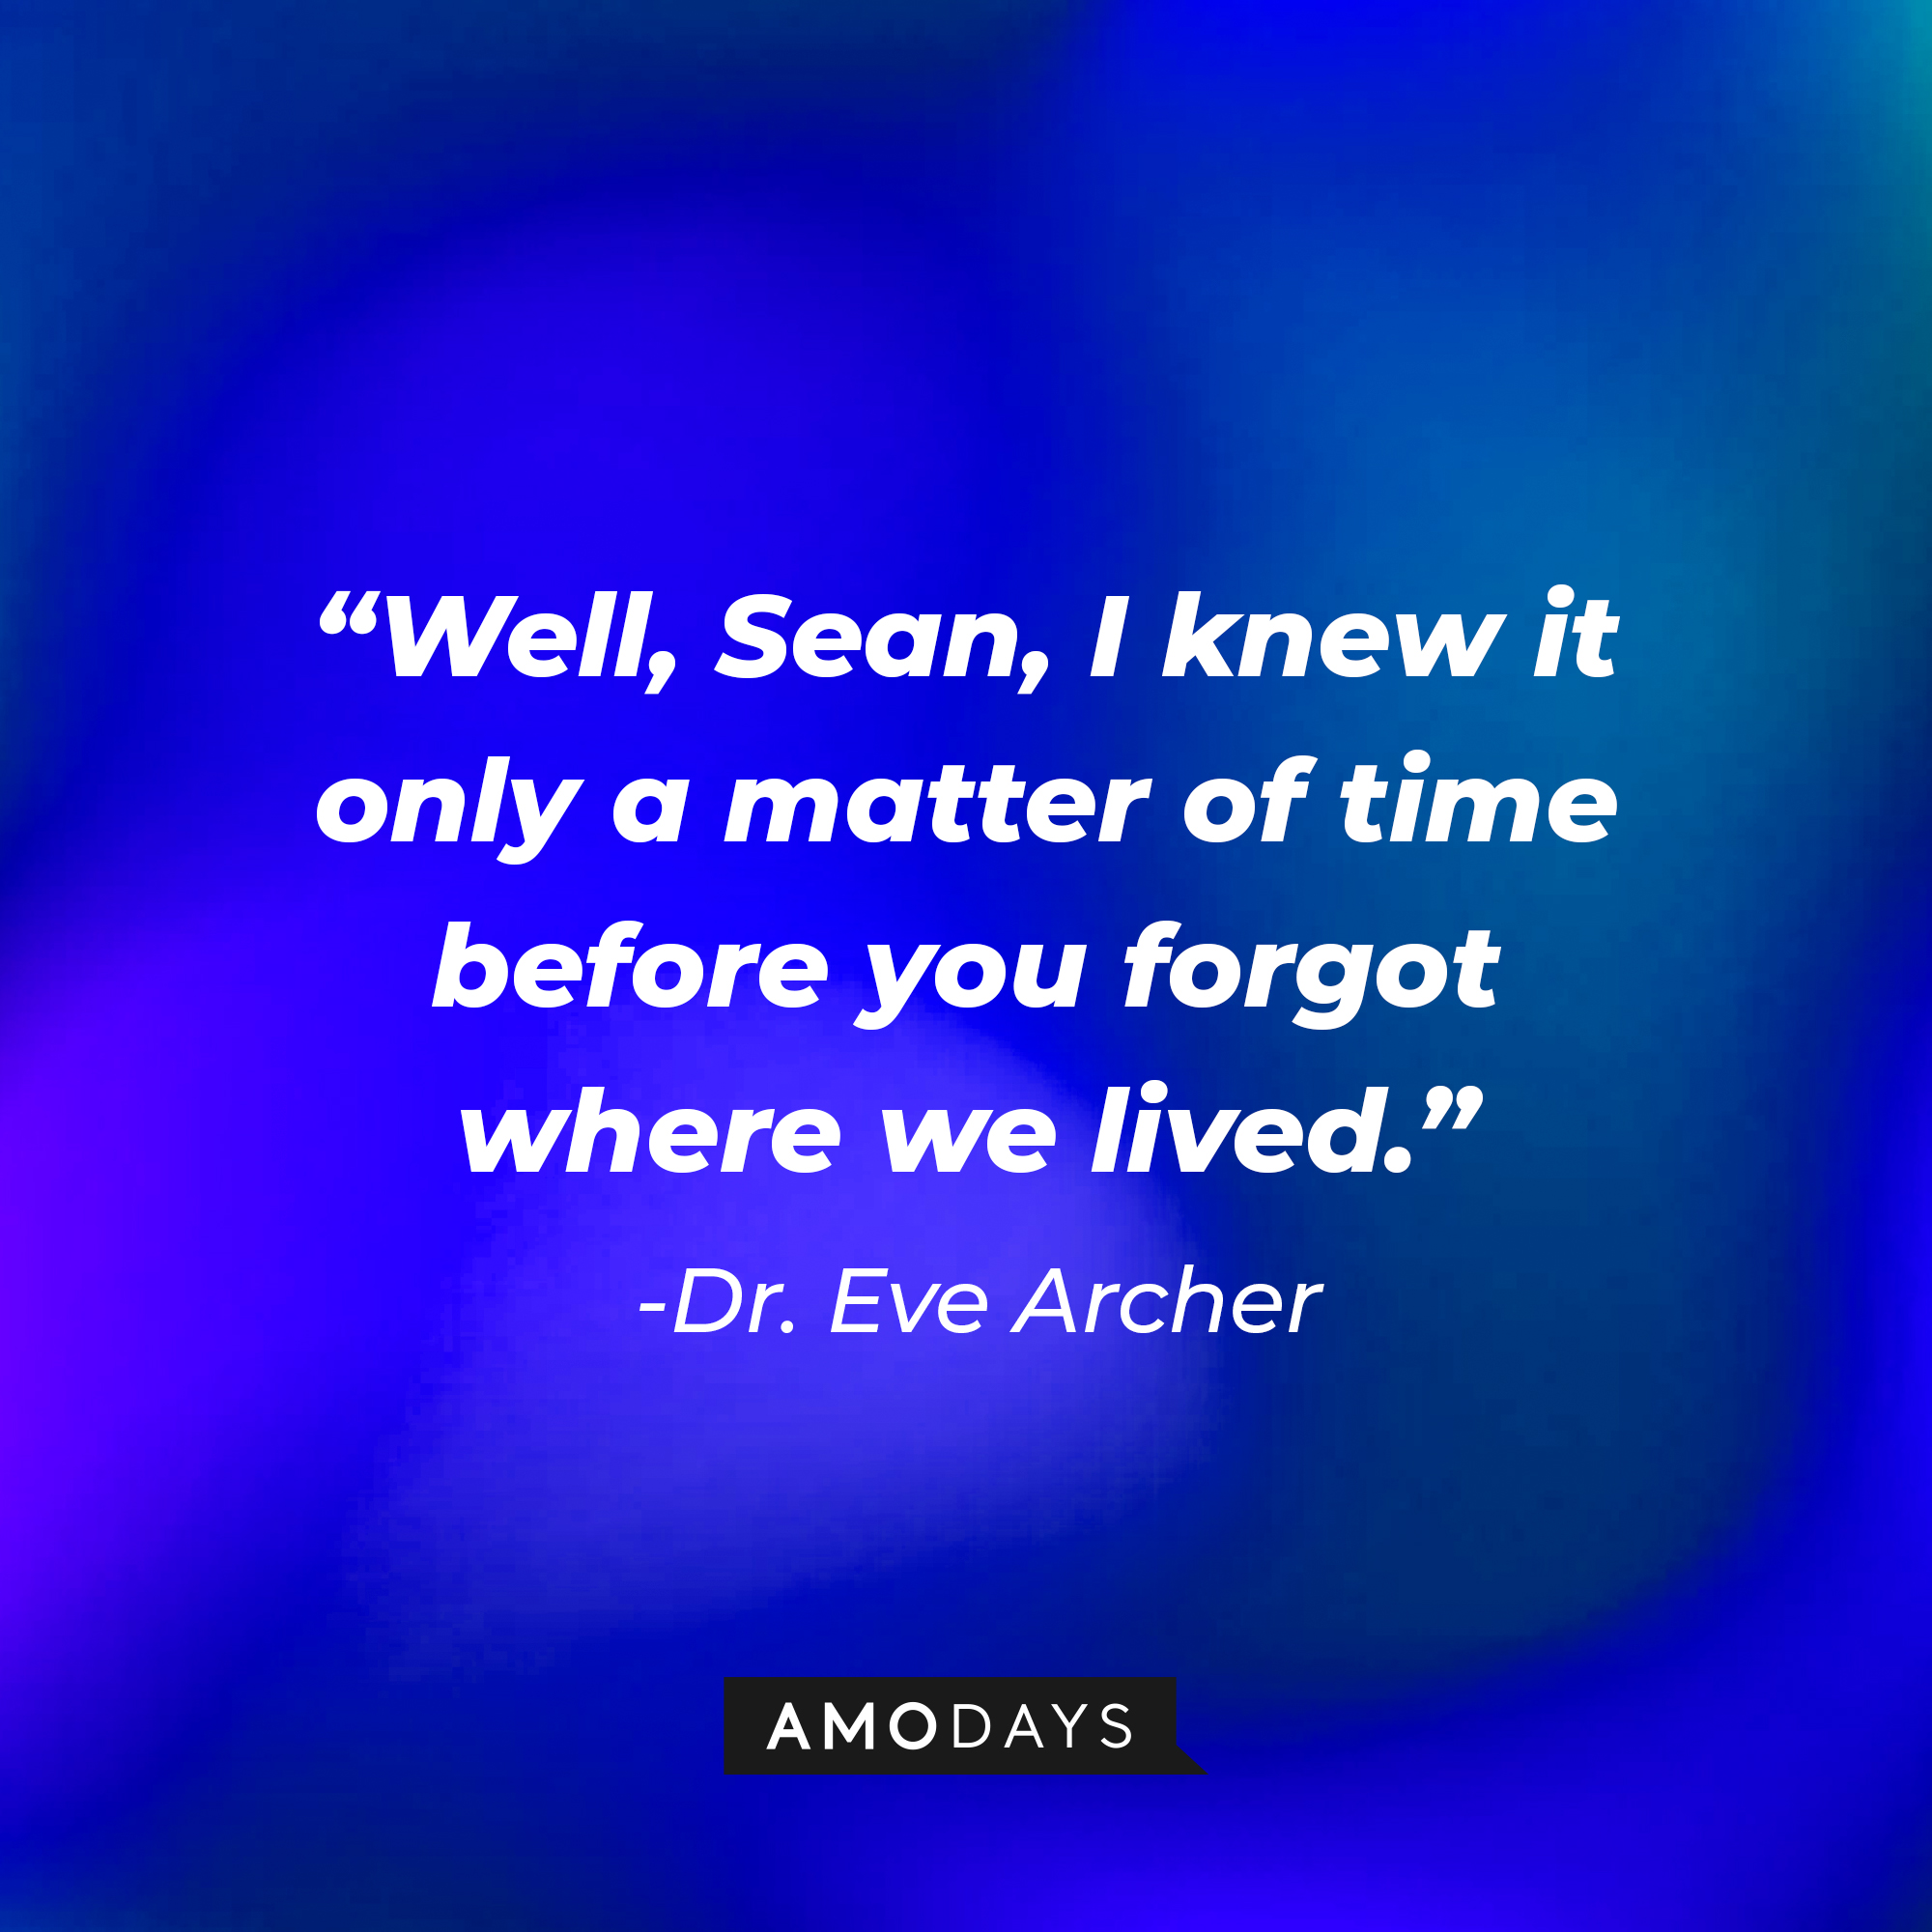 Dr. Eve Archer's quote: “Well, Sean, I knew it only a matter of time before you forgot where we lived.” : Source: Amodays